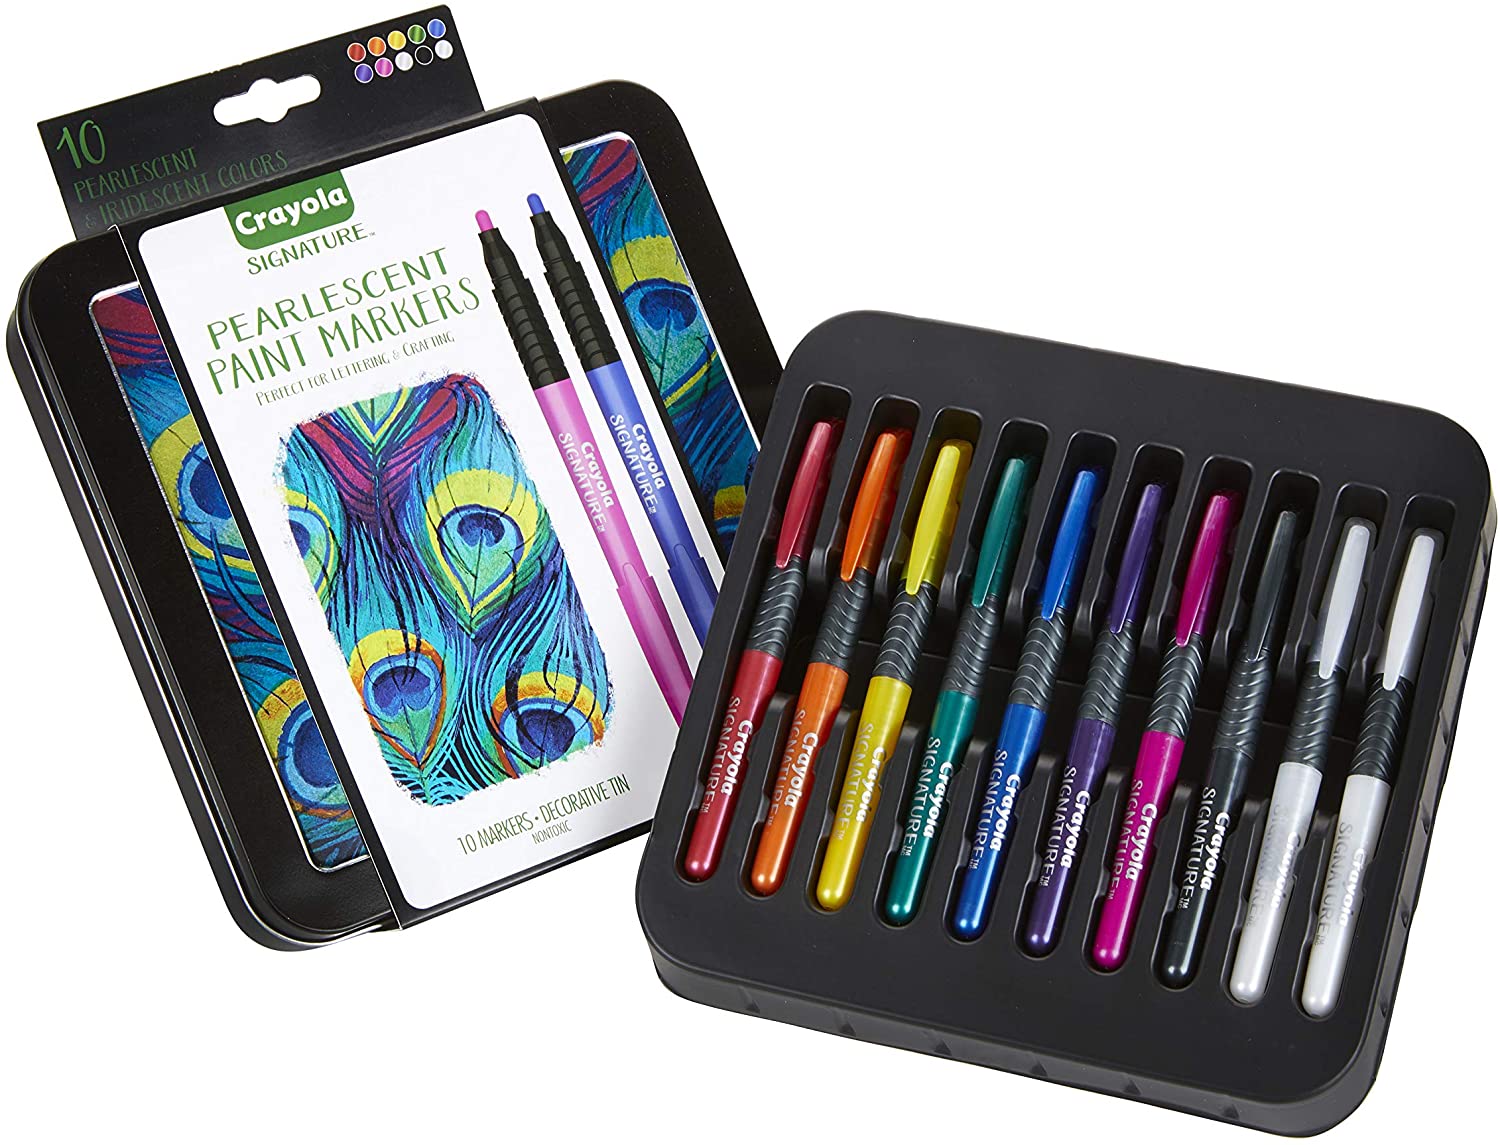 Crayola Age 14 Plus Signature 10 Count Pearlescent Paint Markers